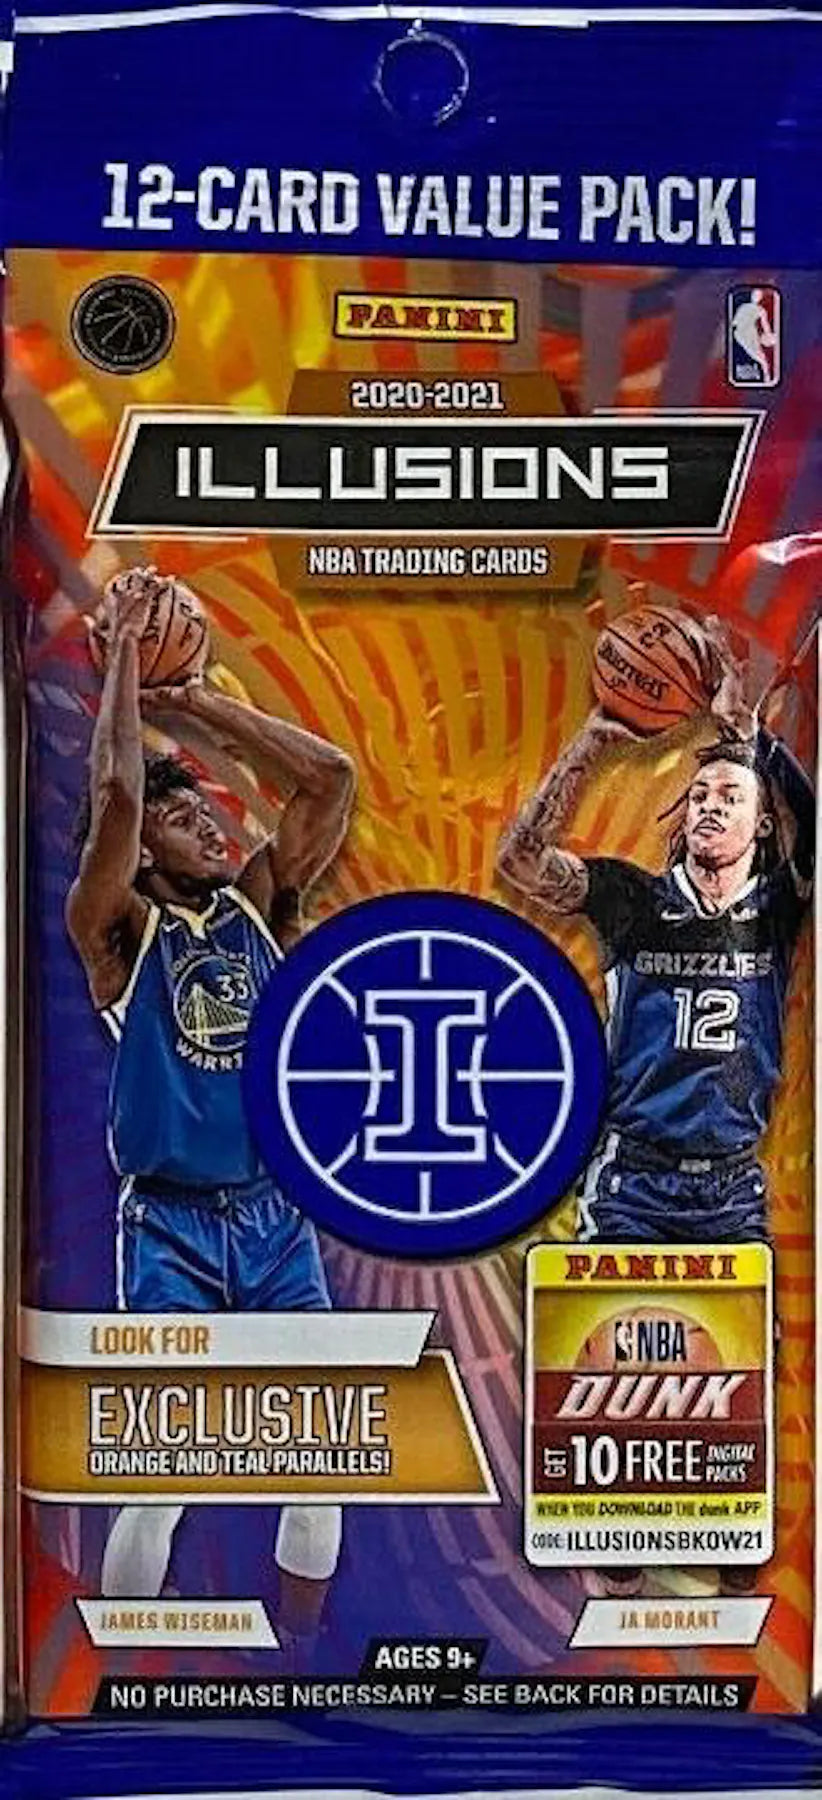 2020/21 Panini Illusions Basketball Jumbo Value Pack (Orange and Teal Parallels!)